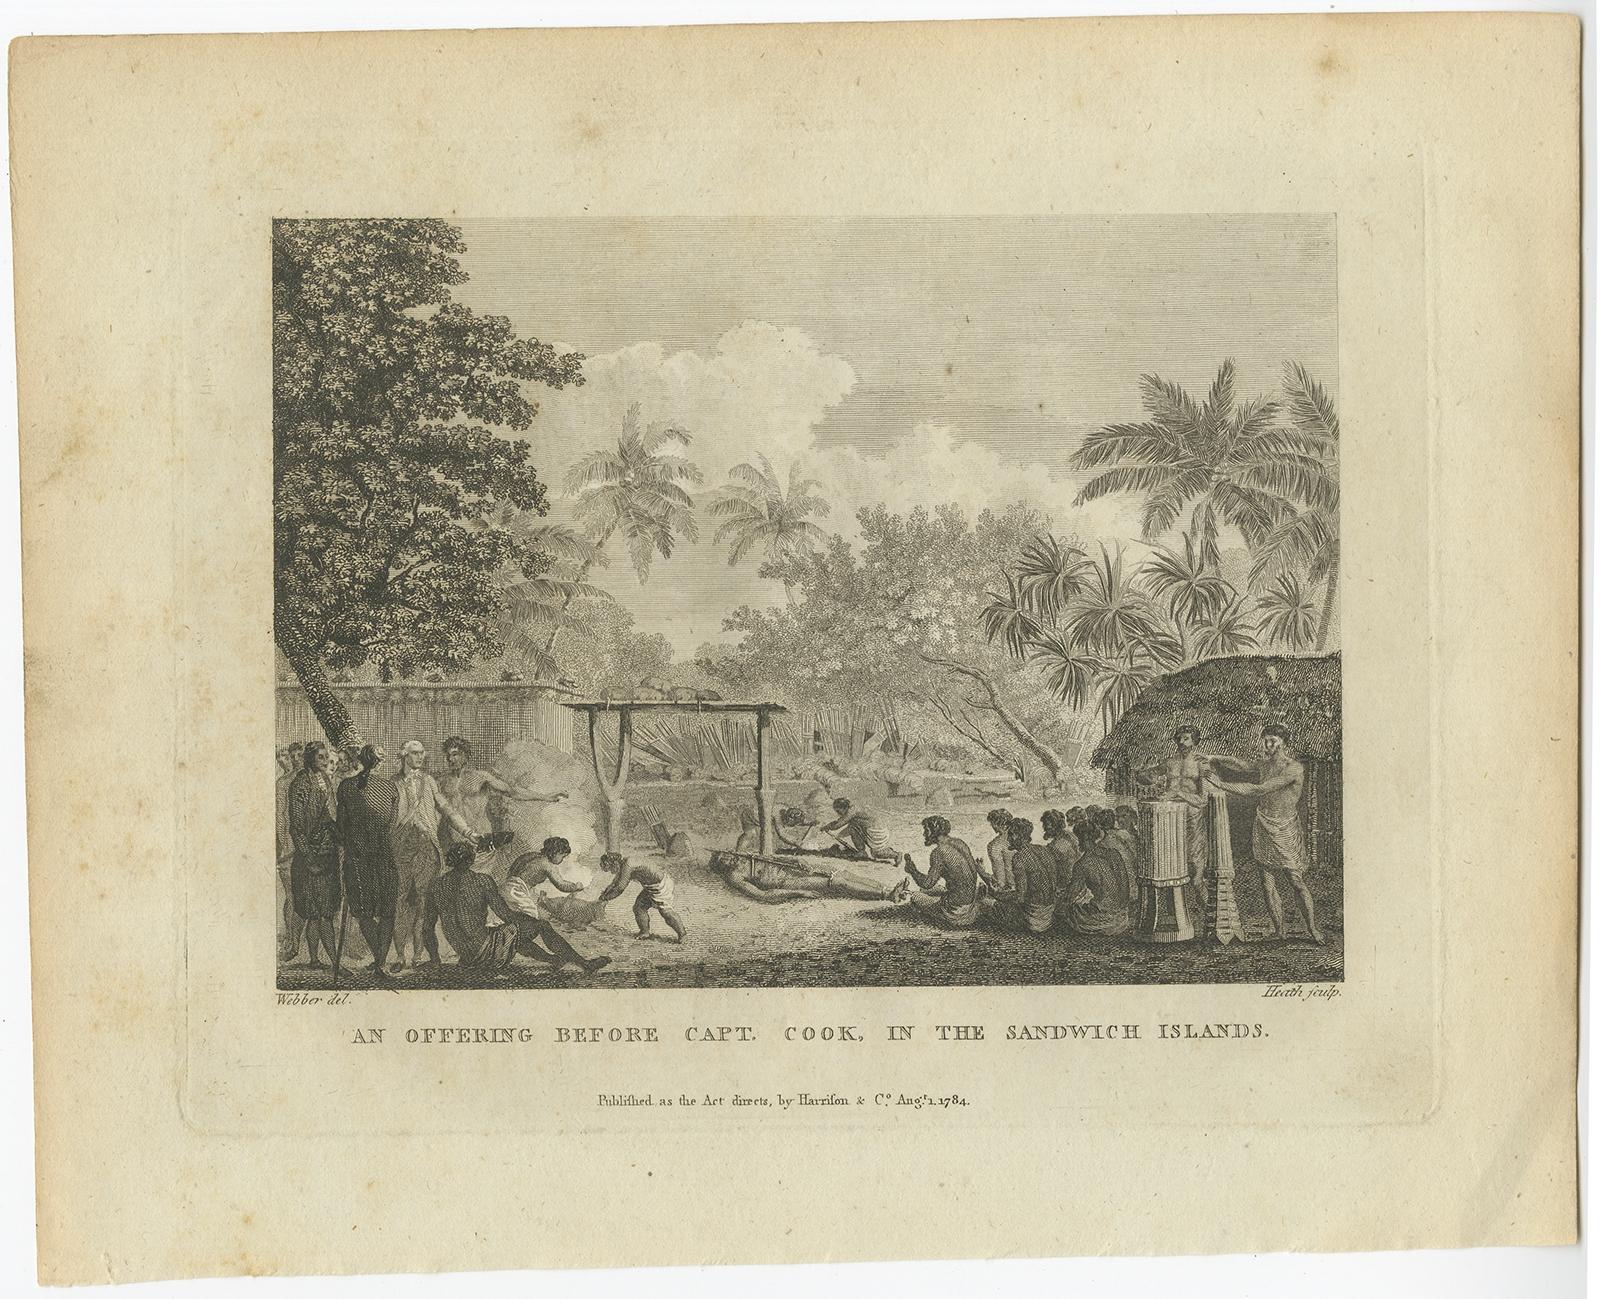 Antique print titled 'An offering before Capt. Cook in the Sandwich Islands'. Old print of several islanders performing an offering ceremony. Also depicted are Captain Cook and several other officers. 

Artists and Engravers: Engraved by Heath.